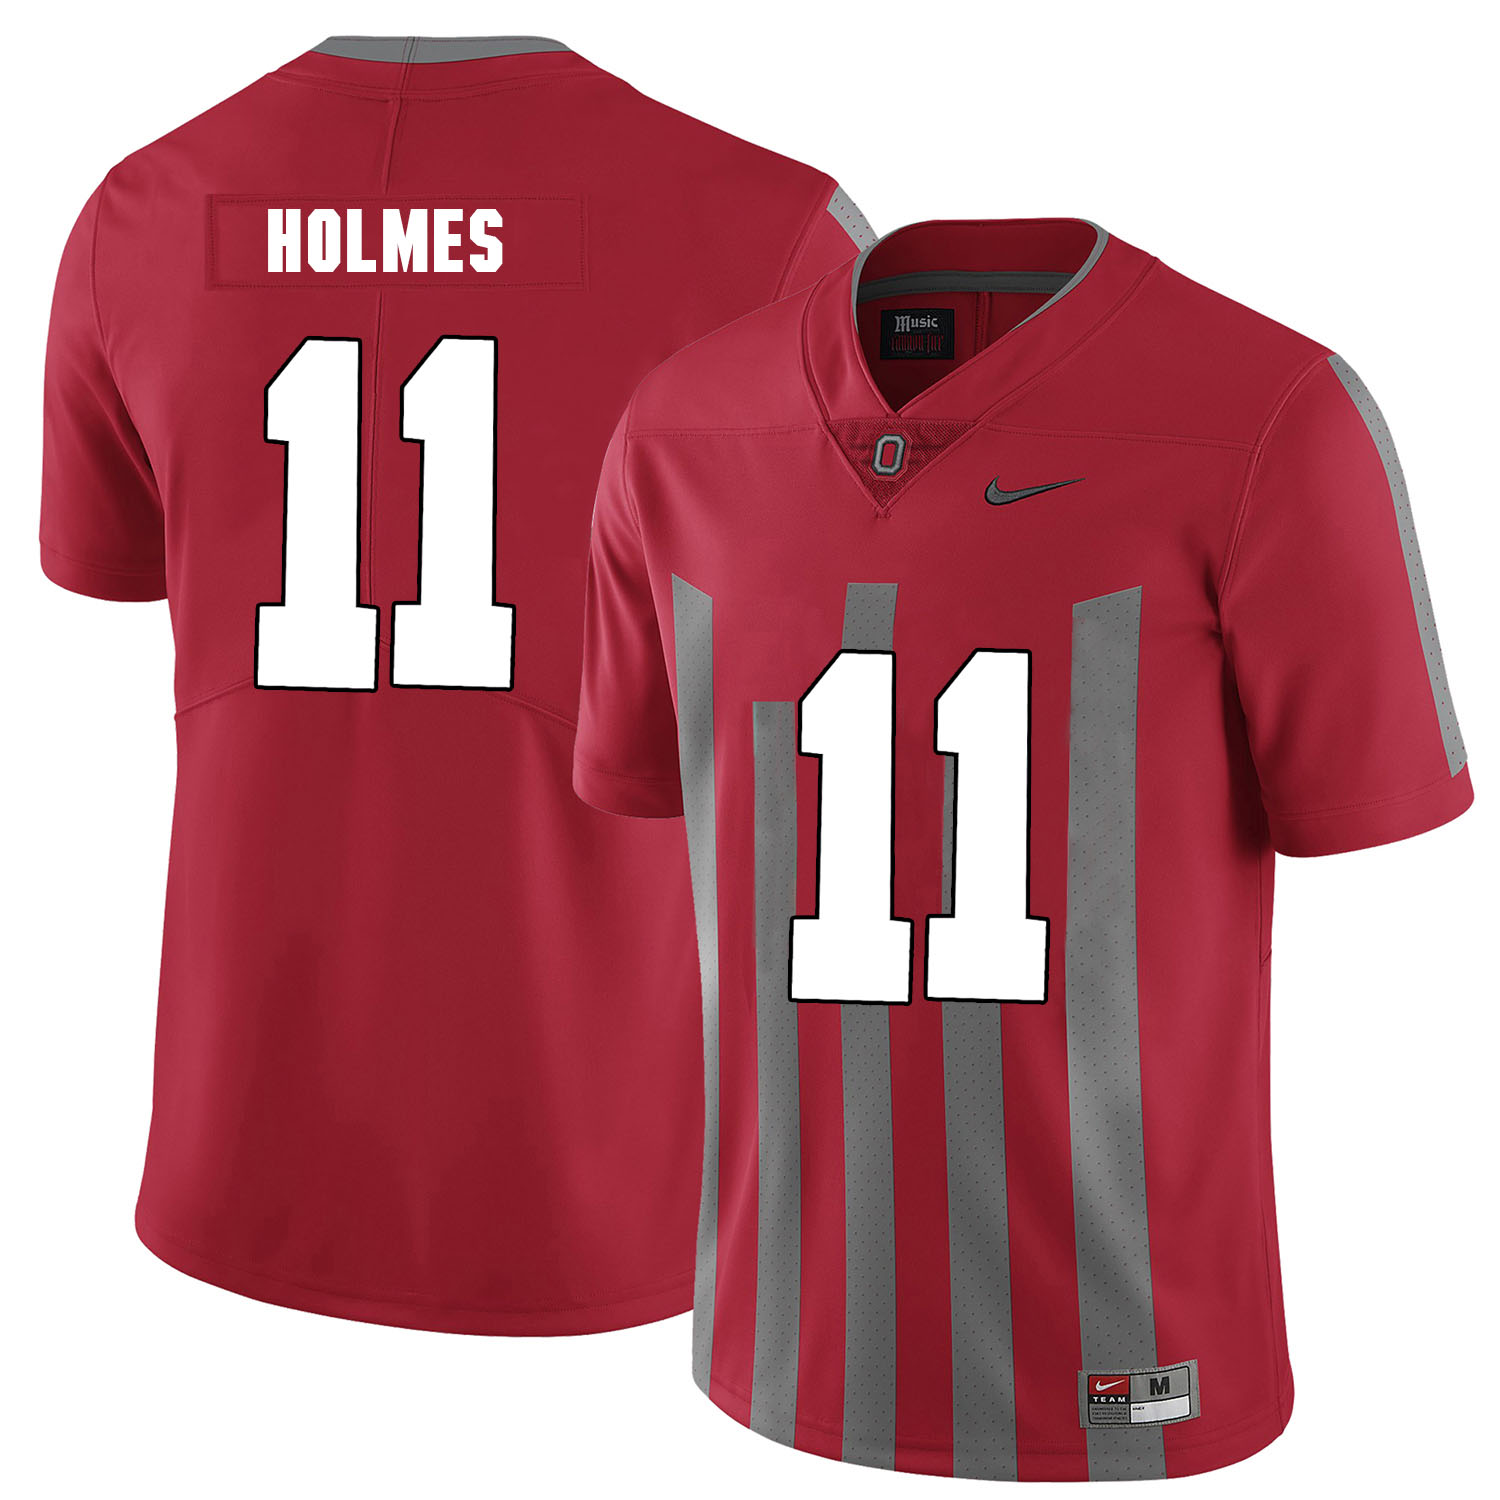 Ohio State Buckeyes 11 Jalyn Holmes Red Elite Nike College Football Jersey